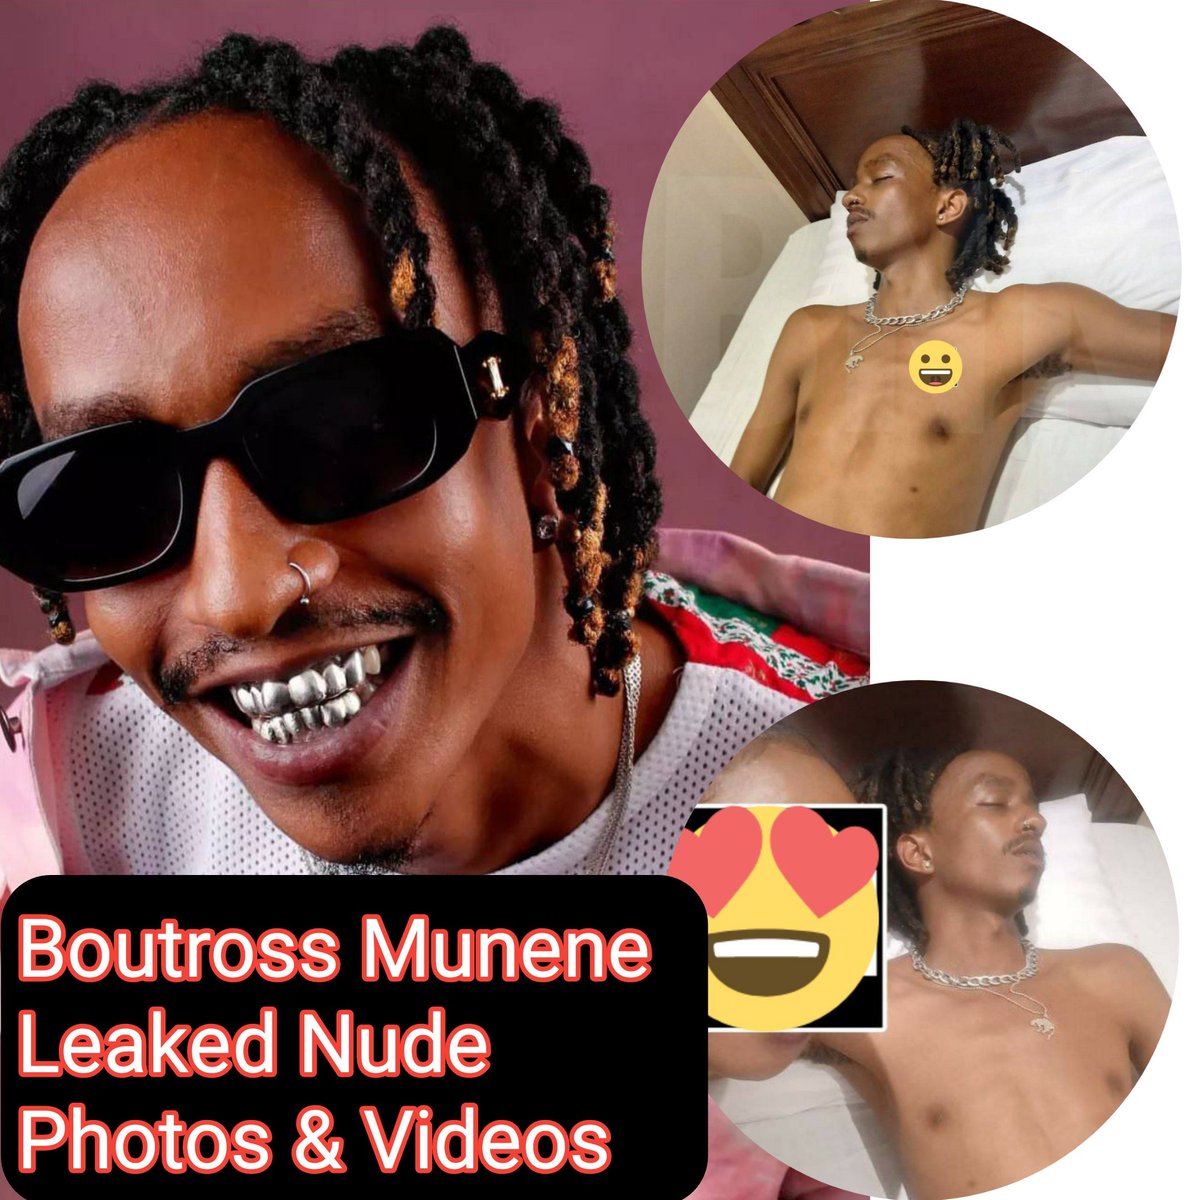 Boutross Munene the Guy mwenye ameimba 'Angela' has decided to unite Kenyans...

Boutross while in Mombasa slept with a lady and paid her 4k.Seems the Lady secretly took photos of him while he was sleeping after he smashed her..Link>>t.me/+W3c05WKh0UliN…